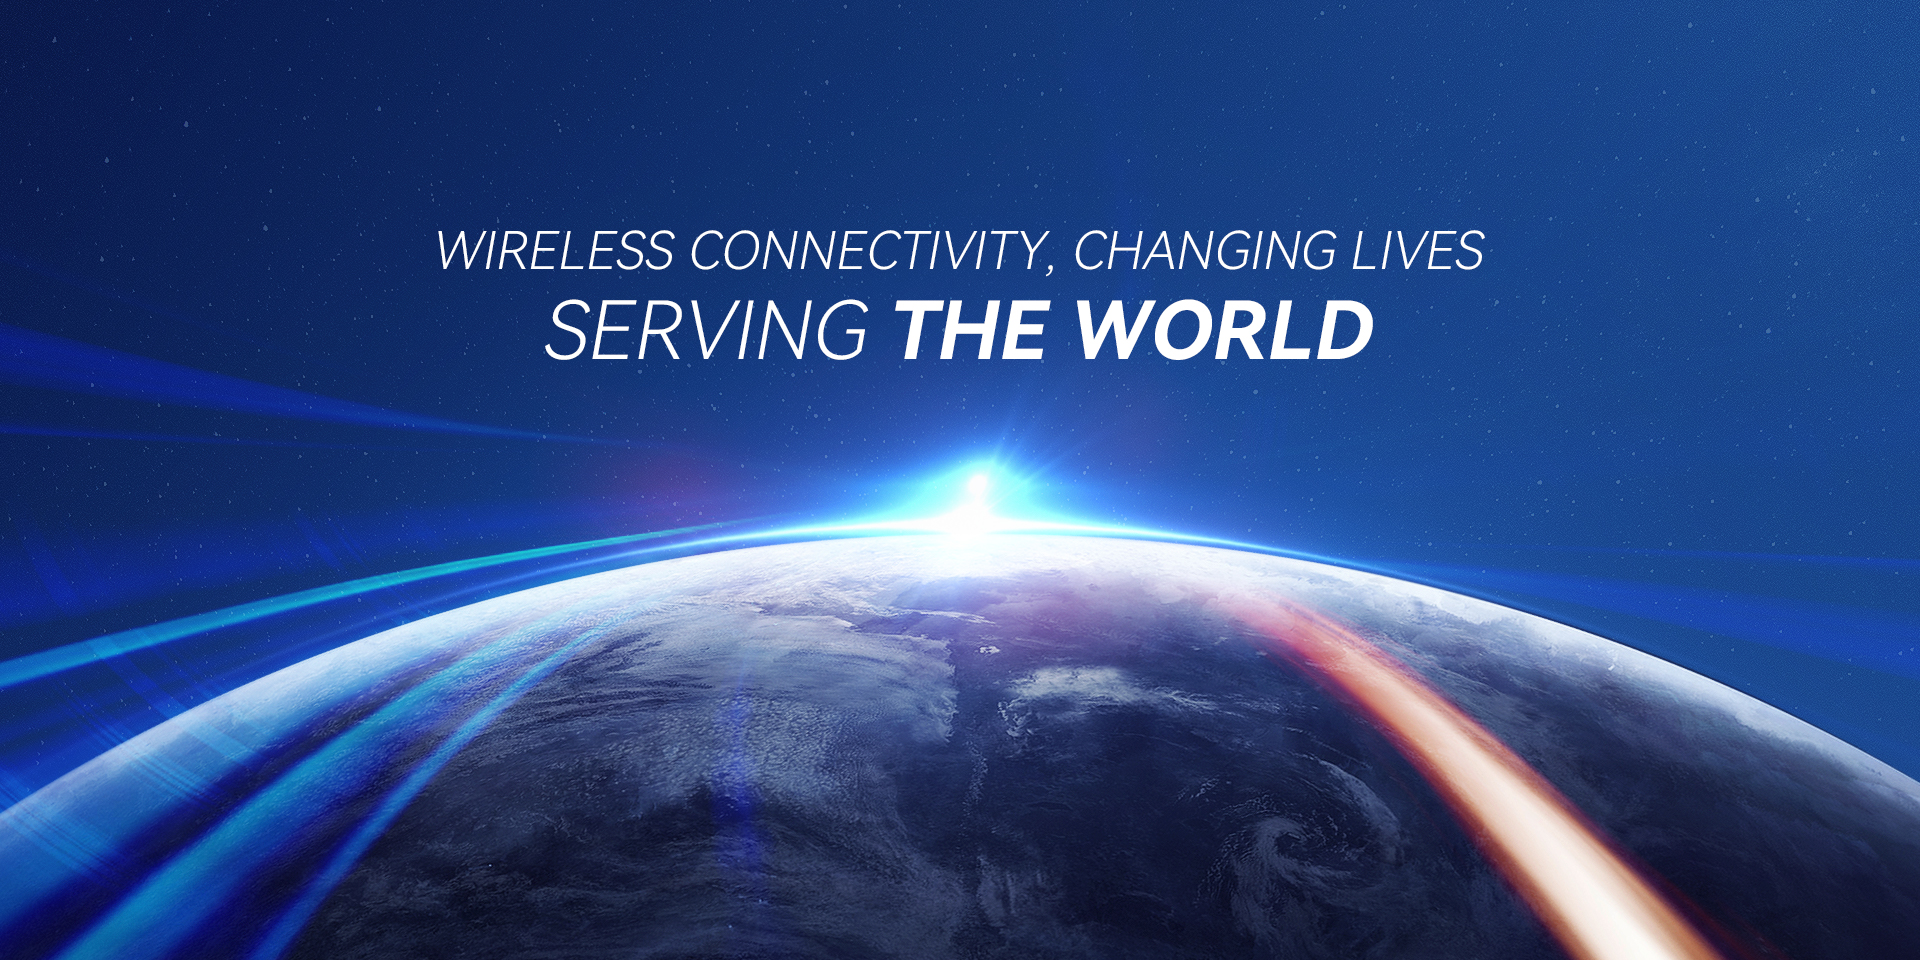 WIRELESS CONNECTIVITY, CHANGING LIVES, SERVING THE WORLD.